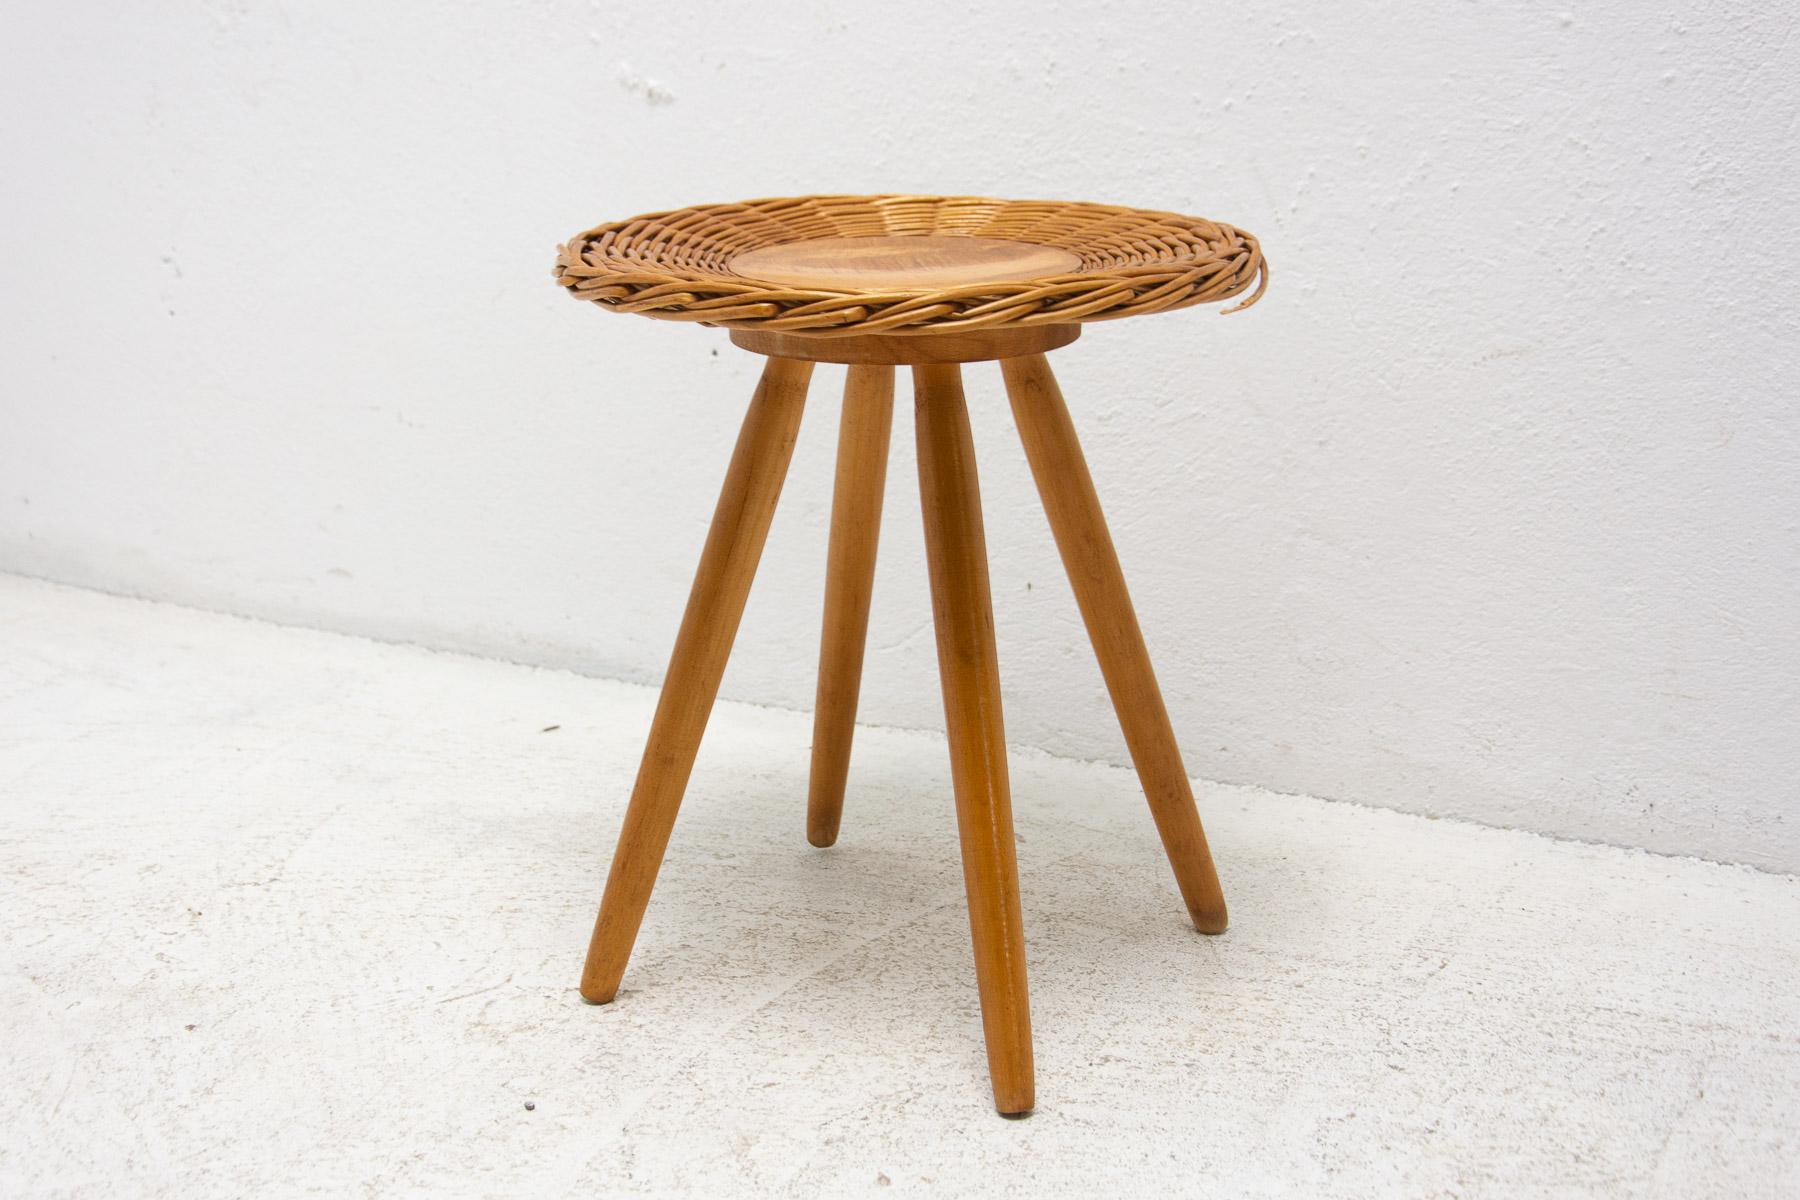 Czechoslovak rattan stool designed by Jan Kalous for ÚLUV in the 1960's. Very simple and elegant design. In good Vintage condition, showing signs of age and using.

Height: 40 cm

width: 36 cm

depth: 36 cm

Seat height : 40 cm.